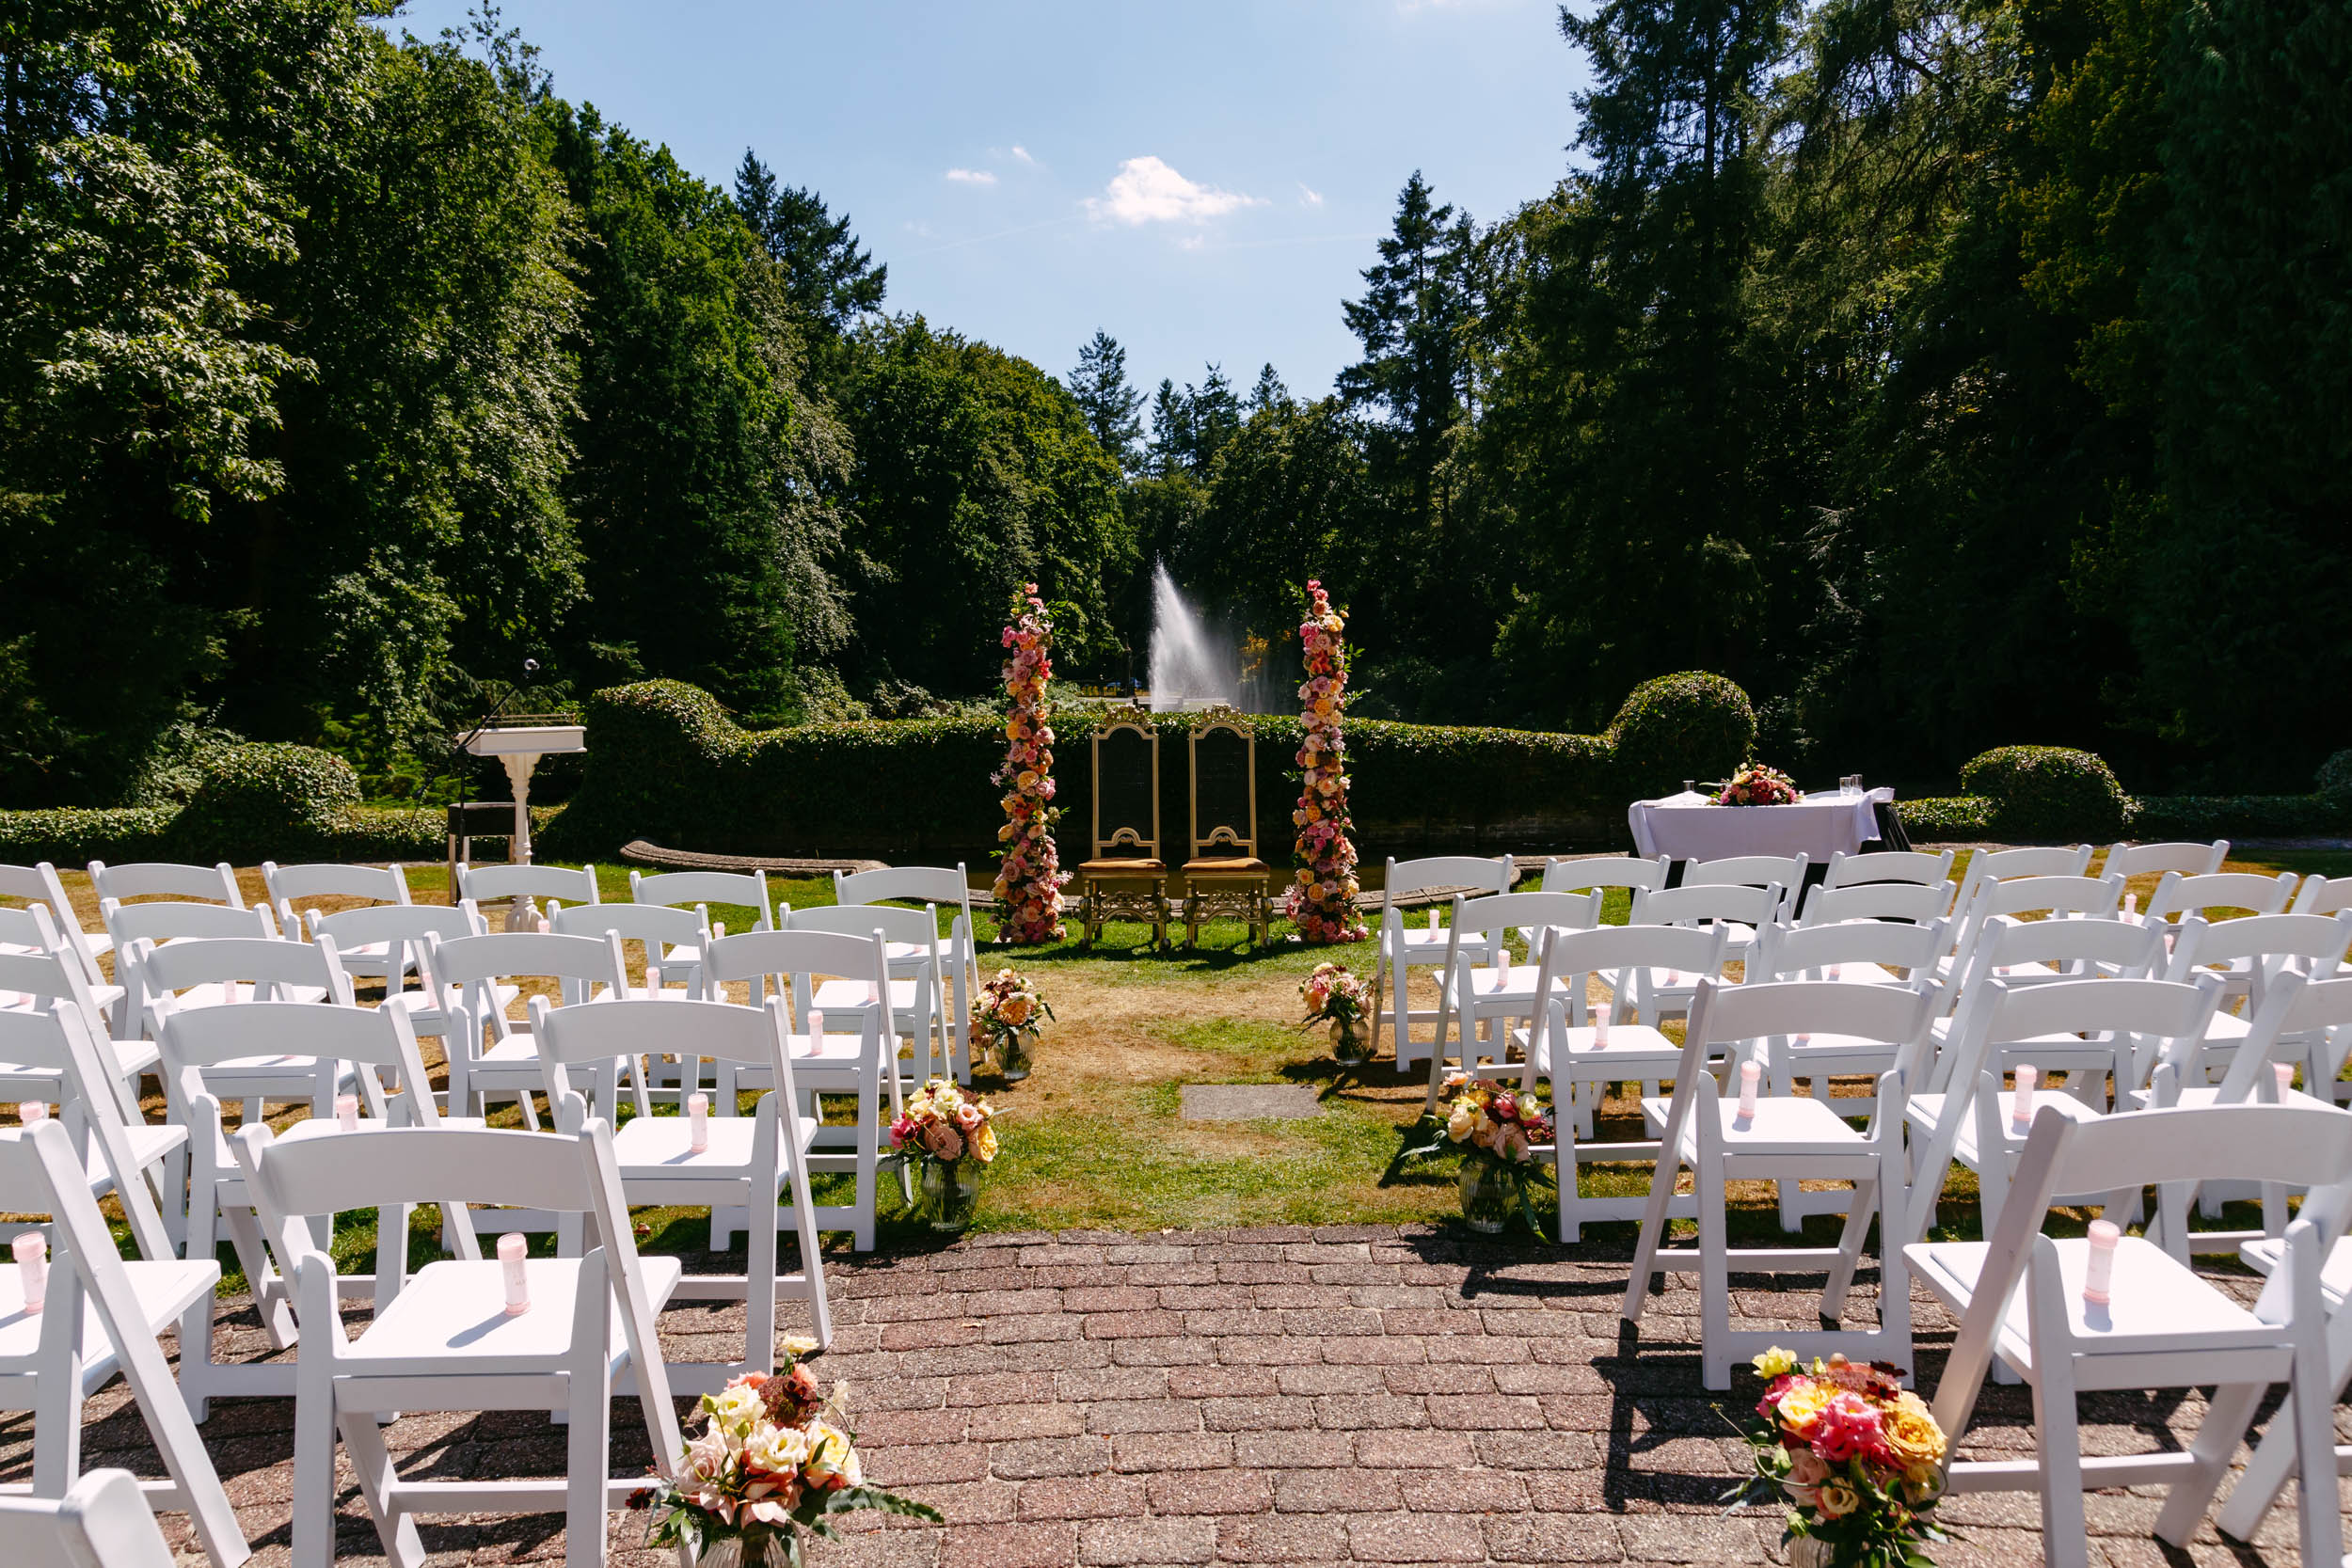 An outdoor wedding ceremony with white chairs and a fountain.